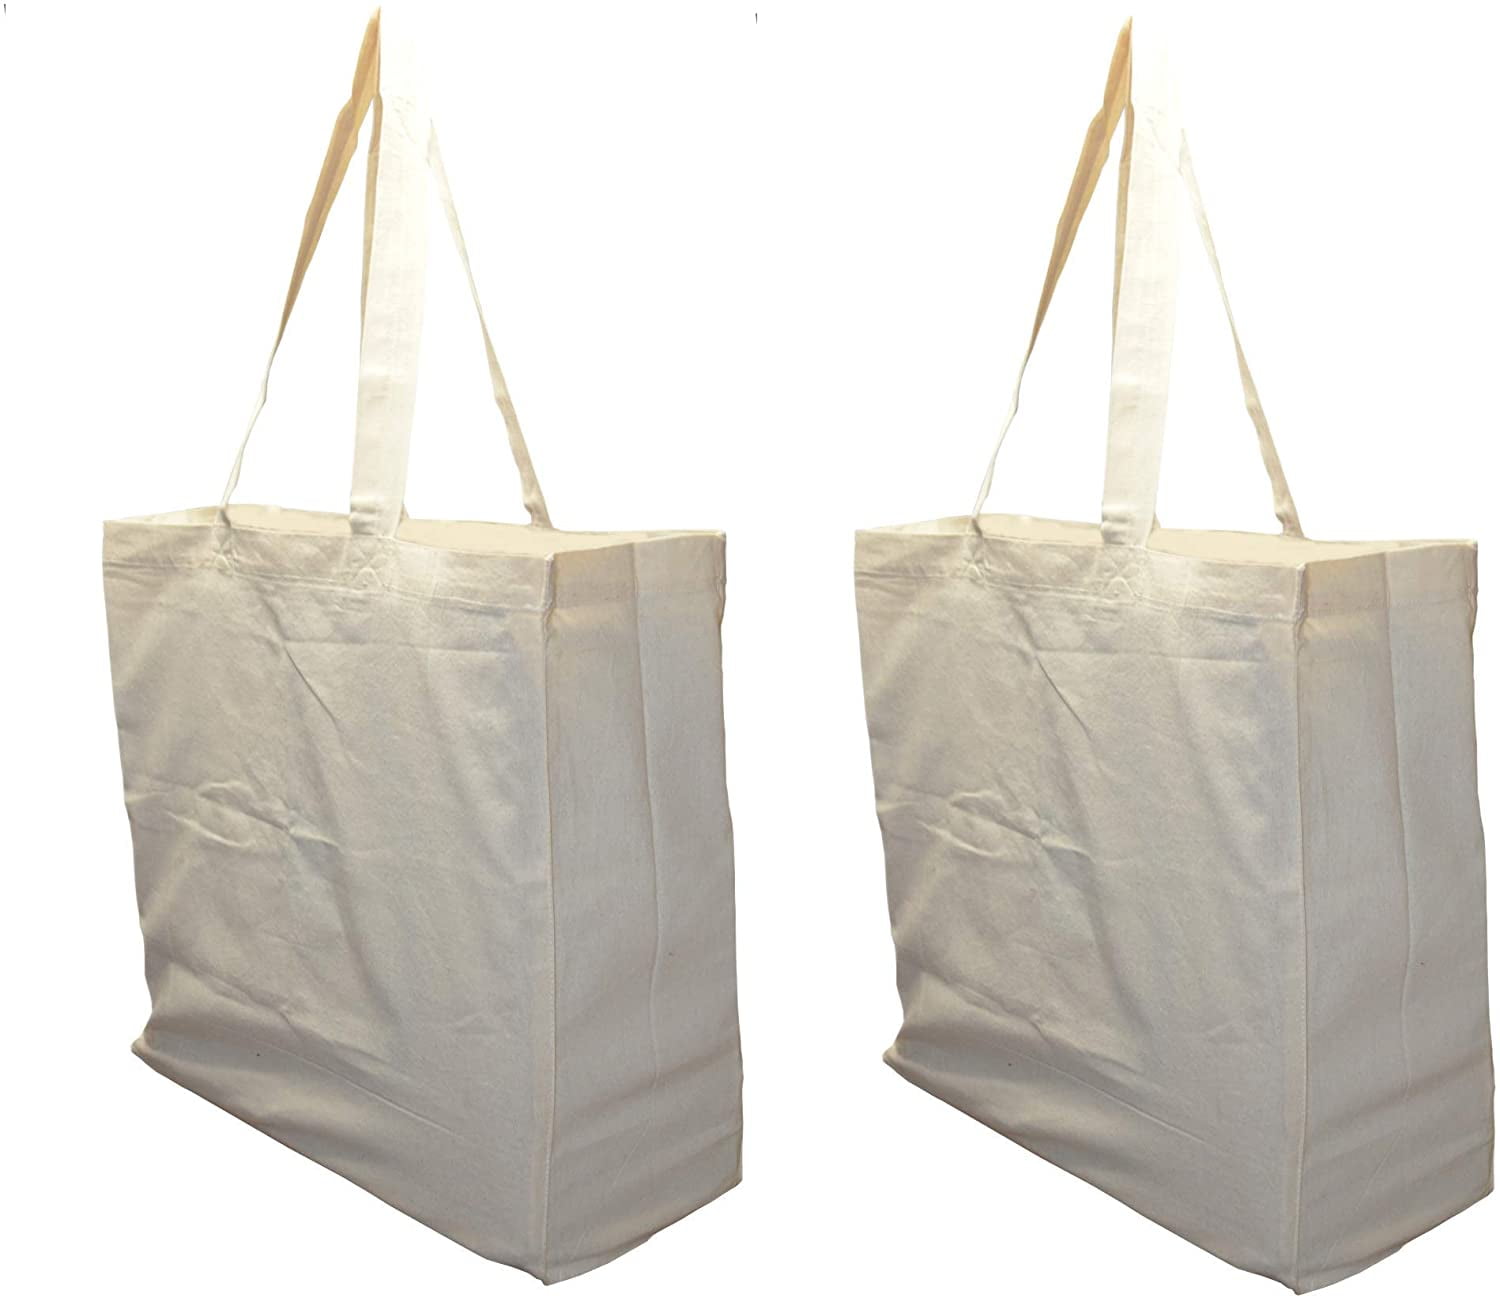 Hand Crotched Eco Friendly Tote Bag Ideal For Fresh Groceries